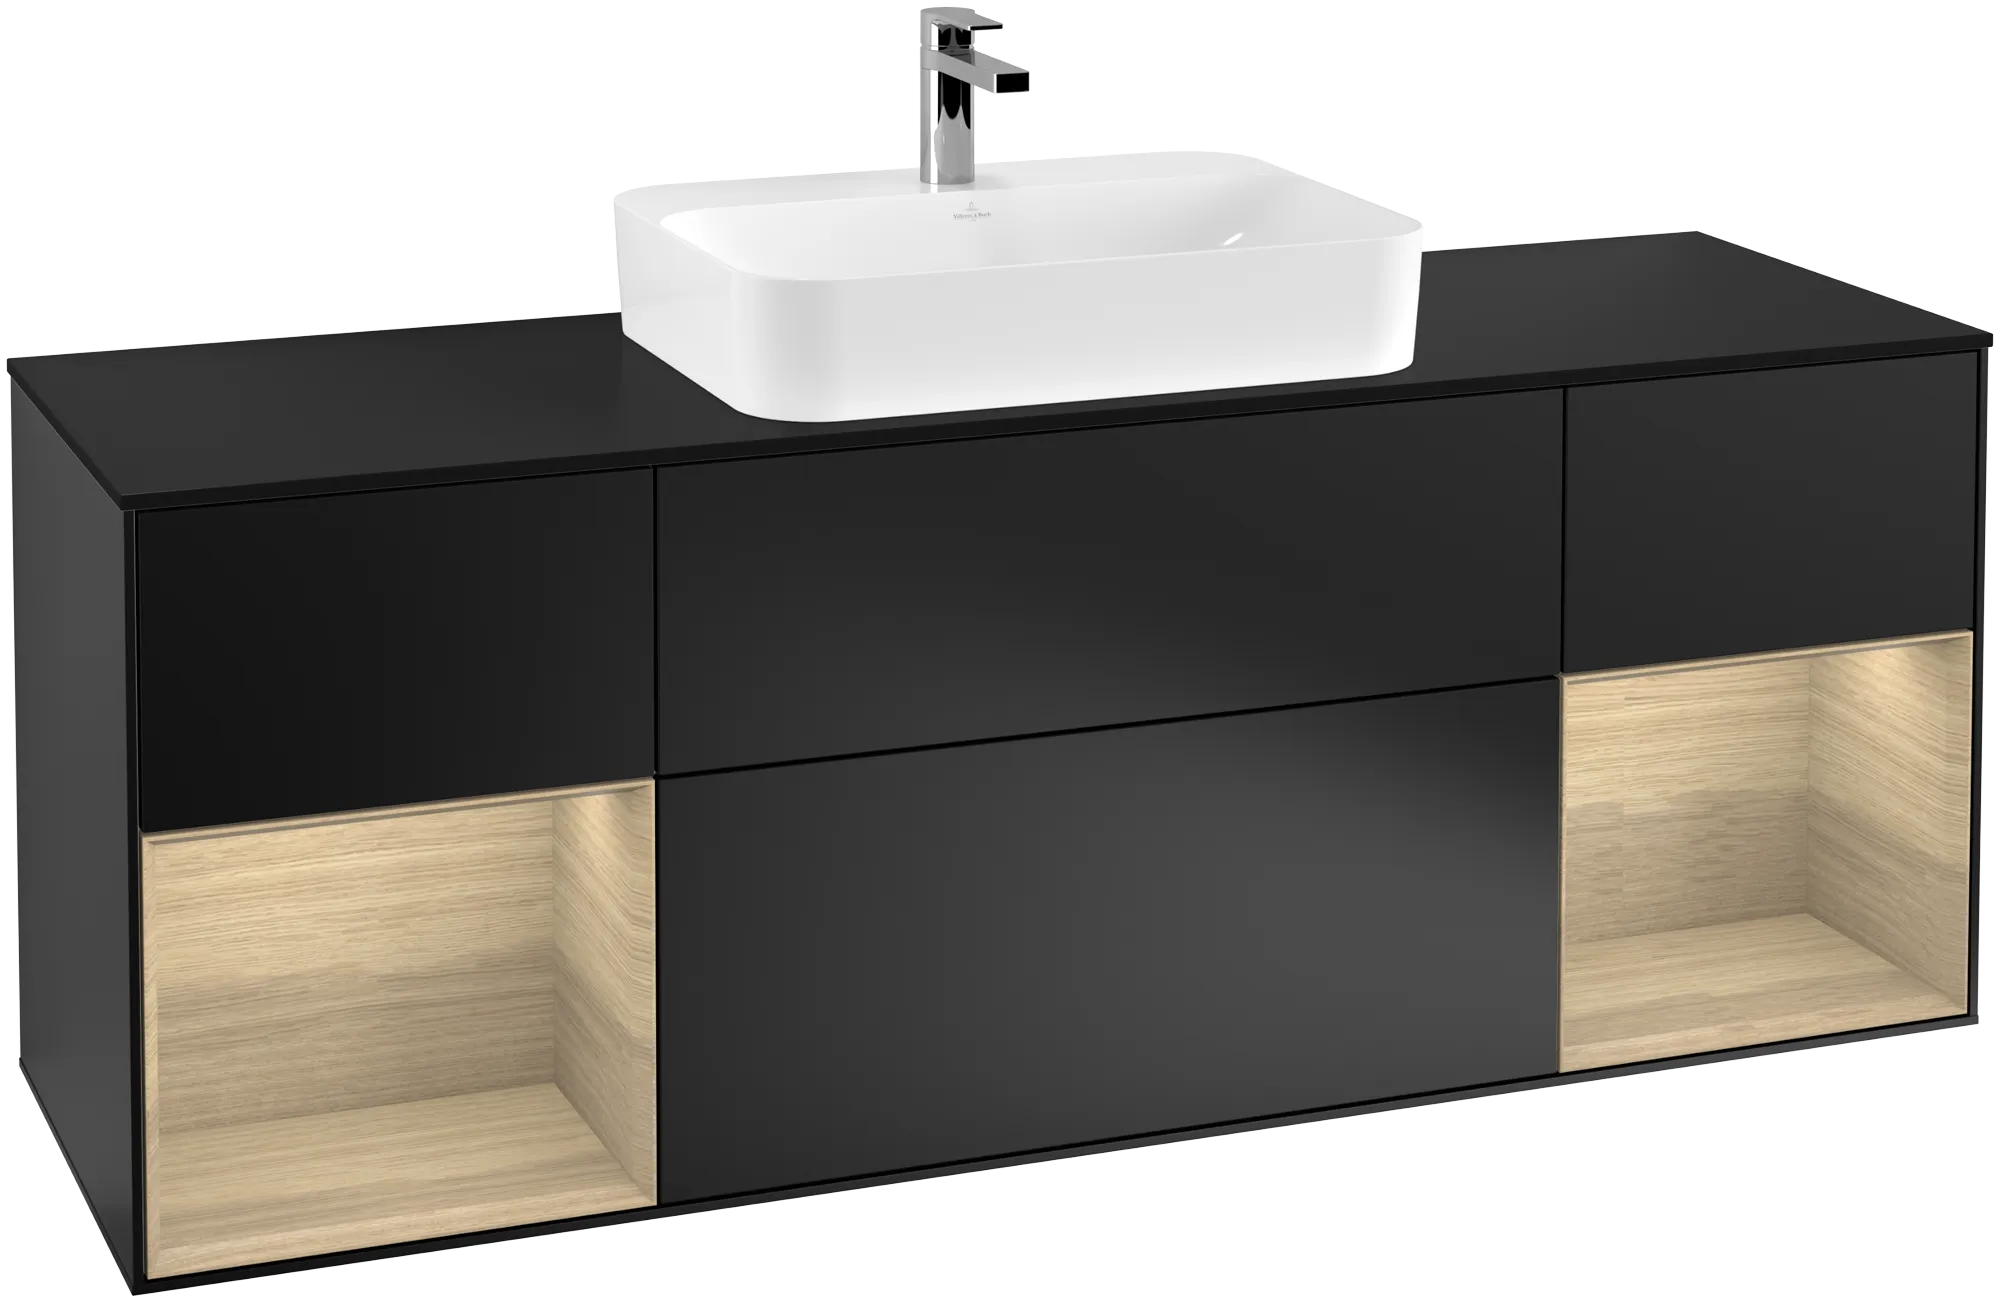 Picture of VILLEROY BOCH Finion Vanity unit, with lighting, 4 pull-out compartments, 1600 x 603 x 501 mm, Black Matt Lacquer / Oak Veneer / Glass Black Matt #G452PCPD